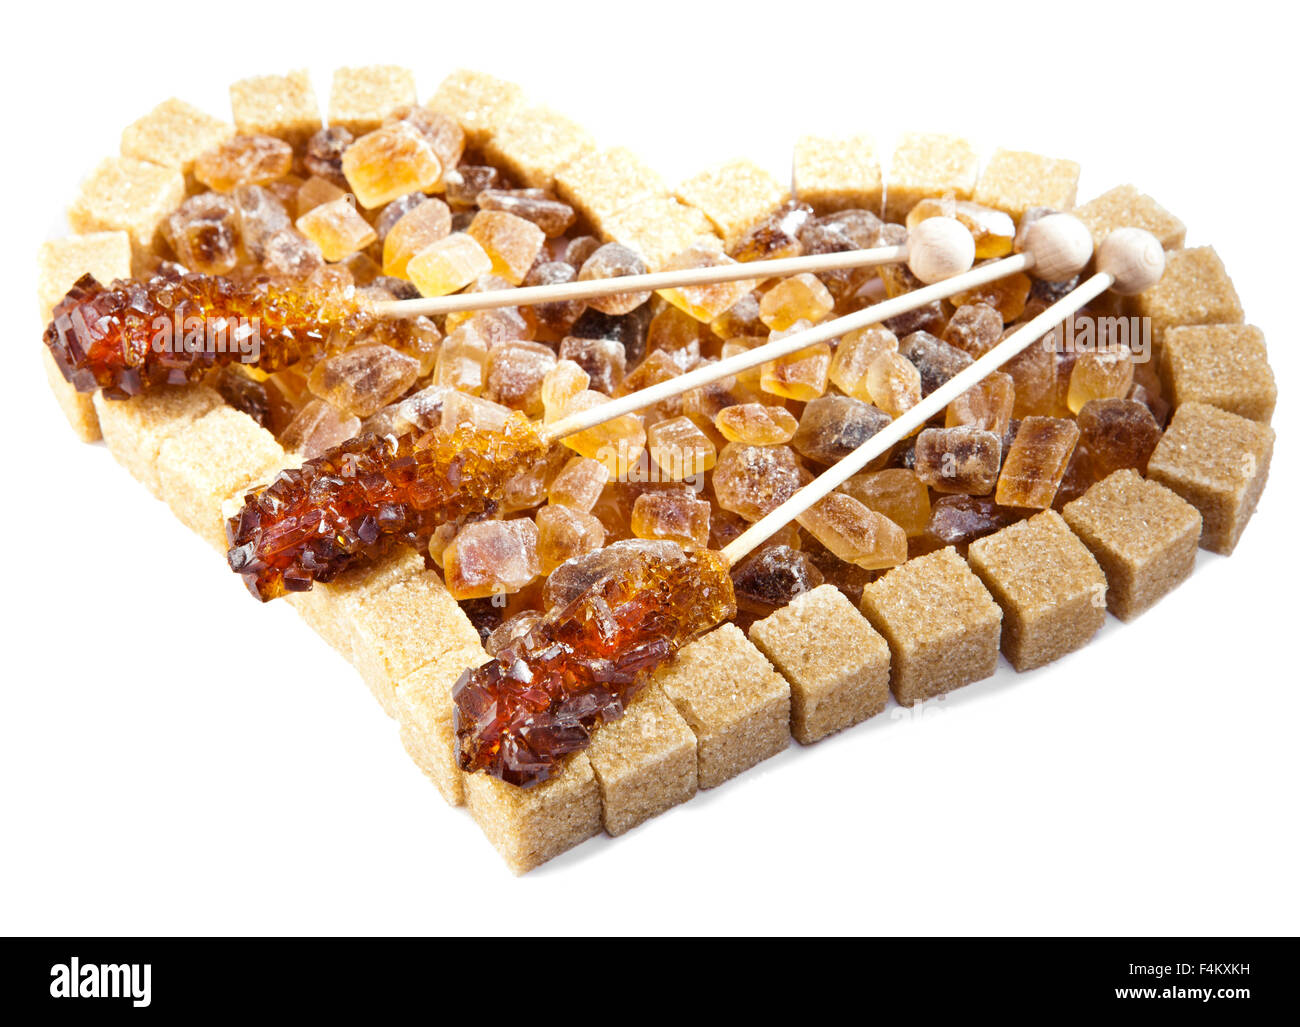 Heart from not refined reed sugar and candy sugar on a stick Stock Photo